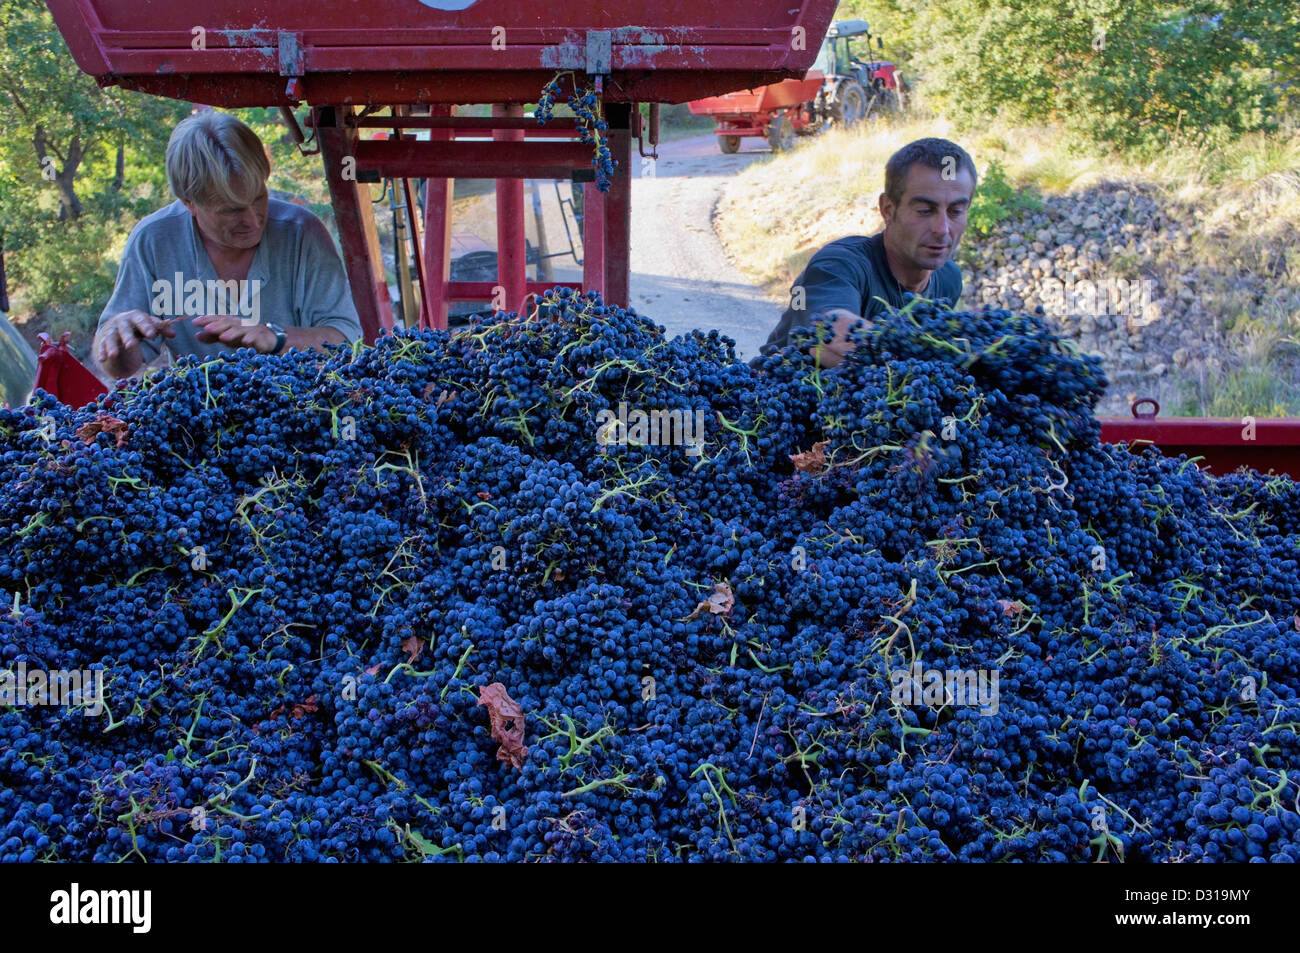 Vineyard, France - Harvested black grapes in trailer from a vineyard in Beaumes-de-Venise, Cote du Rhone, France Stock Photo